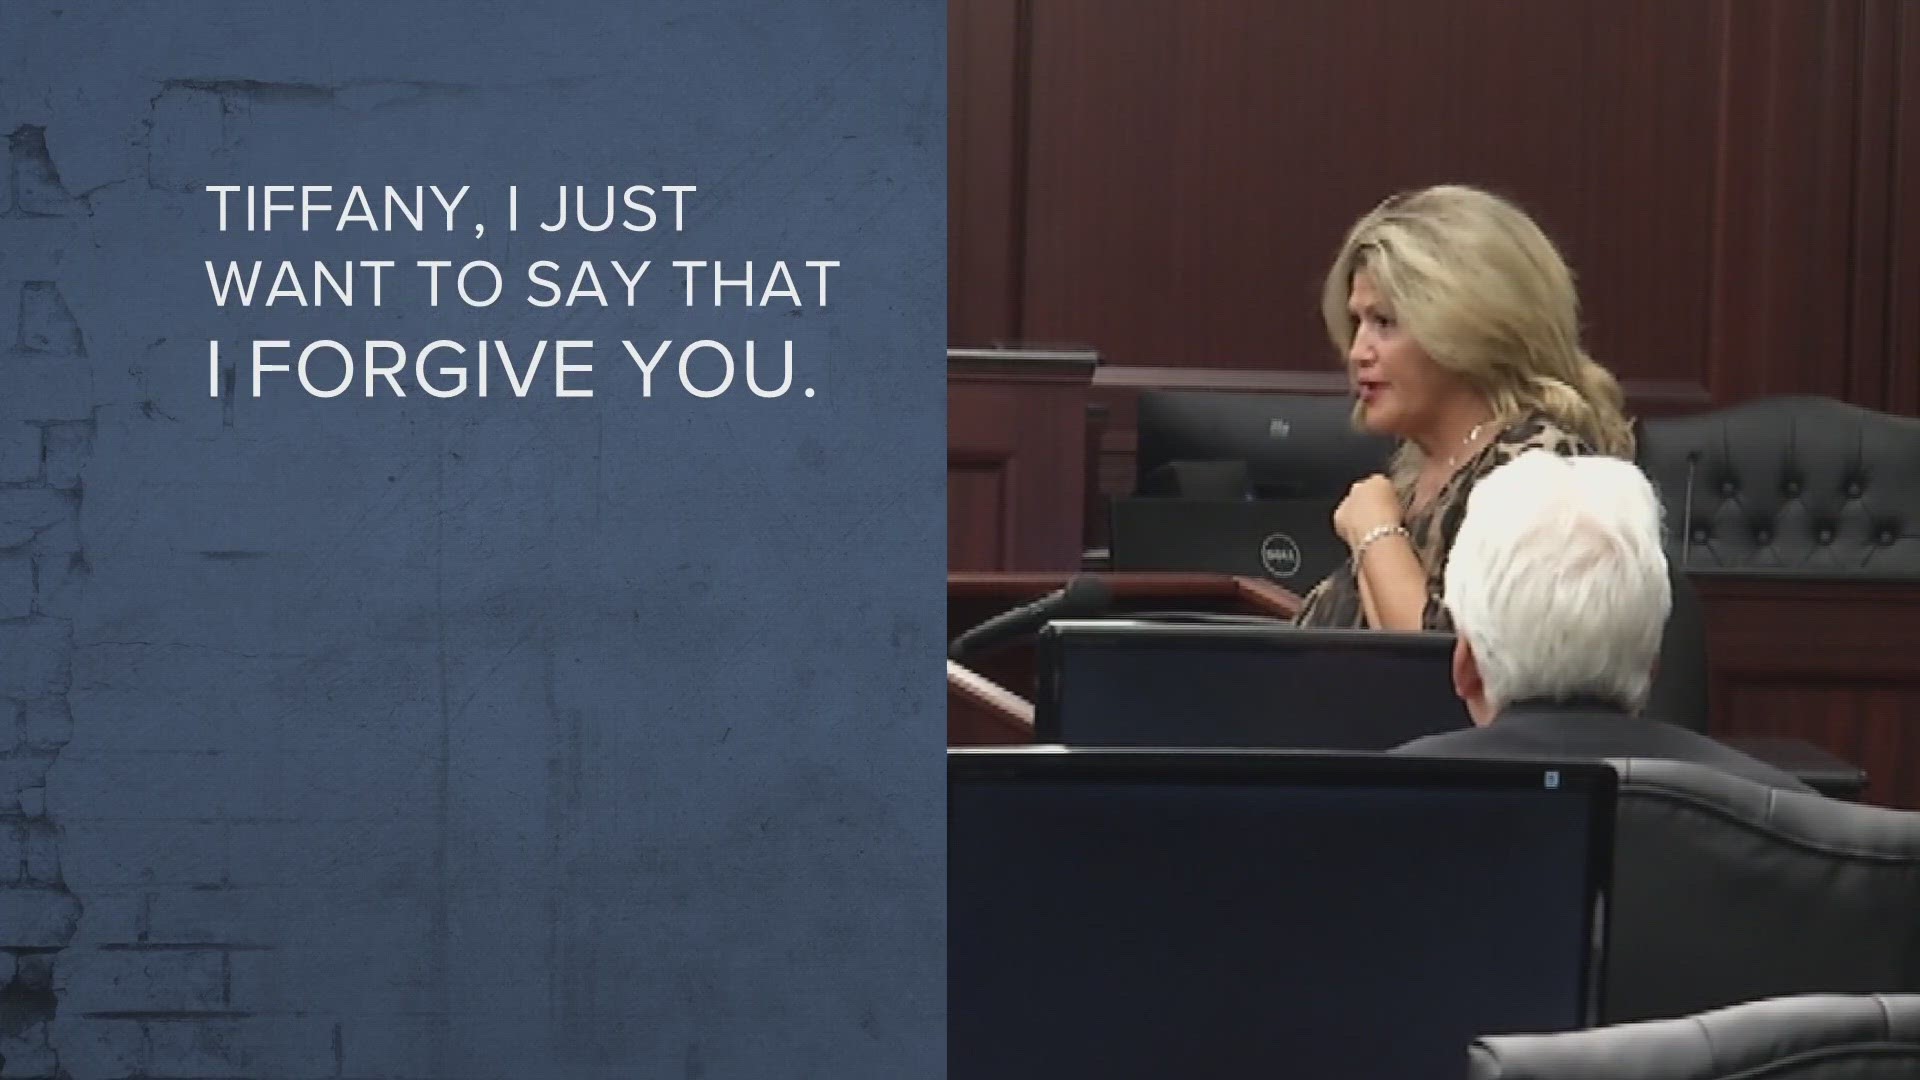 A jury voted 10-2 in favor of a life sentence for Tiffany Cole, sparing her the ultimate punishment for the kidnapping and murder of a Jacksonville couple.